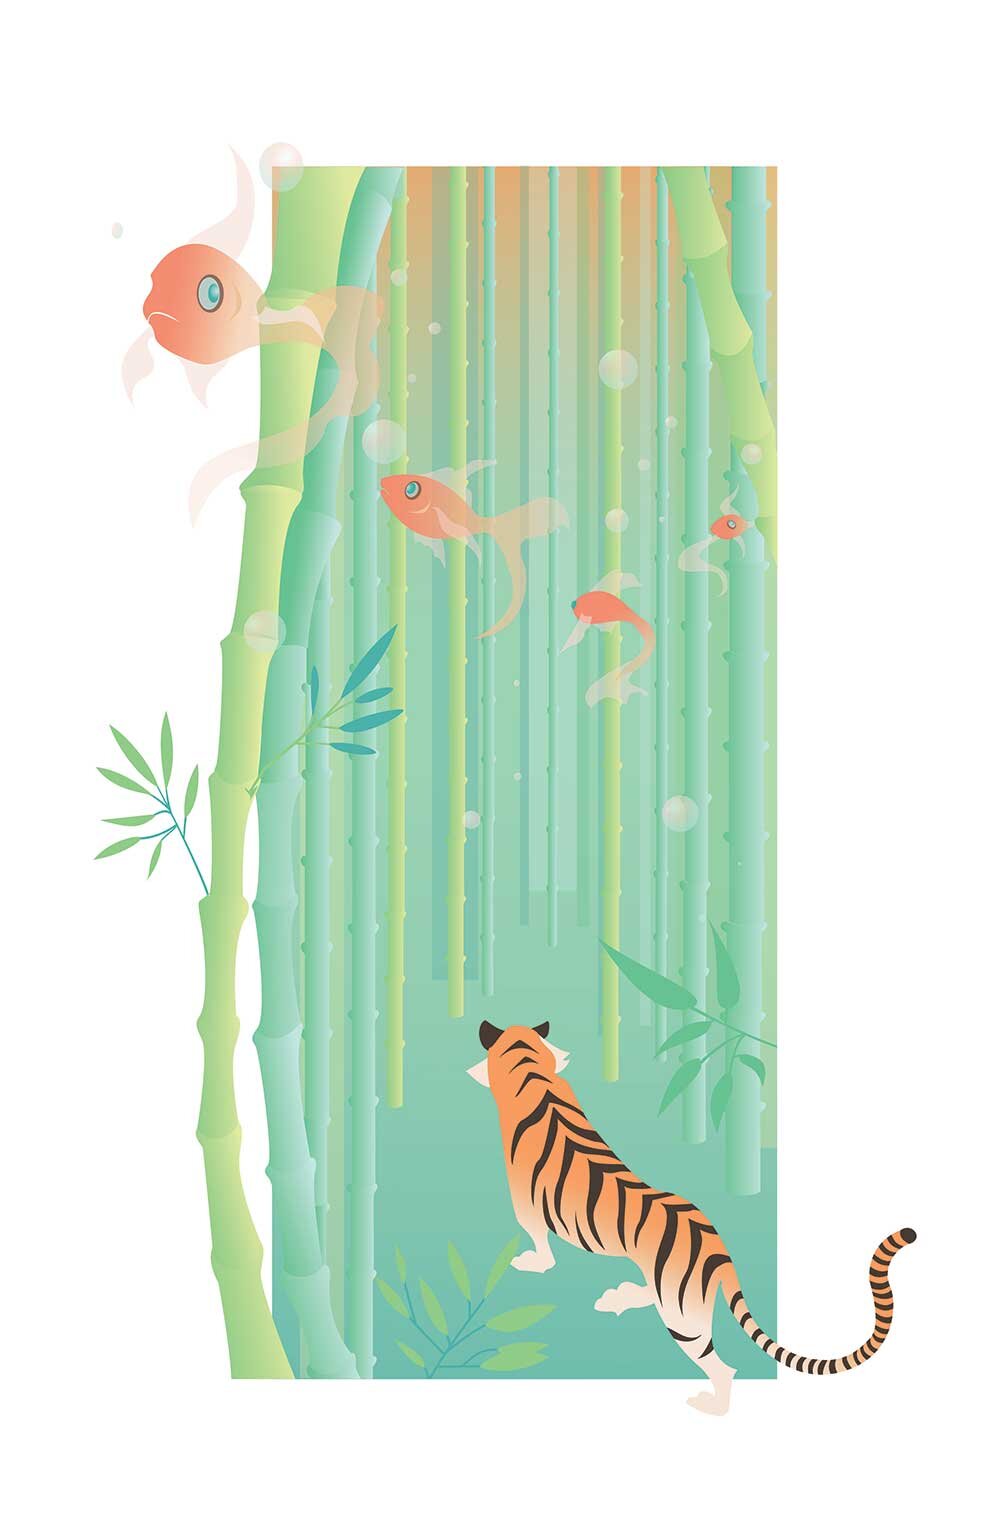 tiger-in-bamboo-forest-2017.jpg